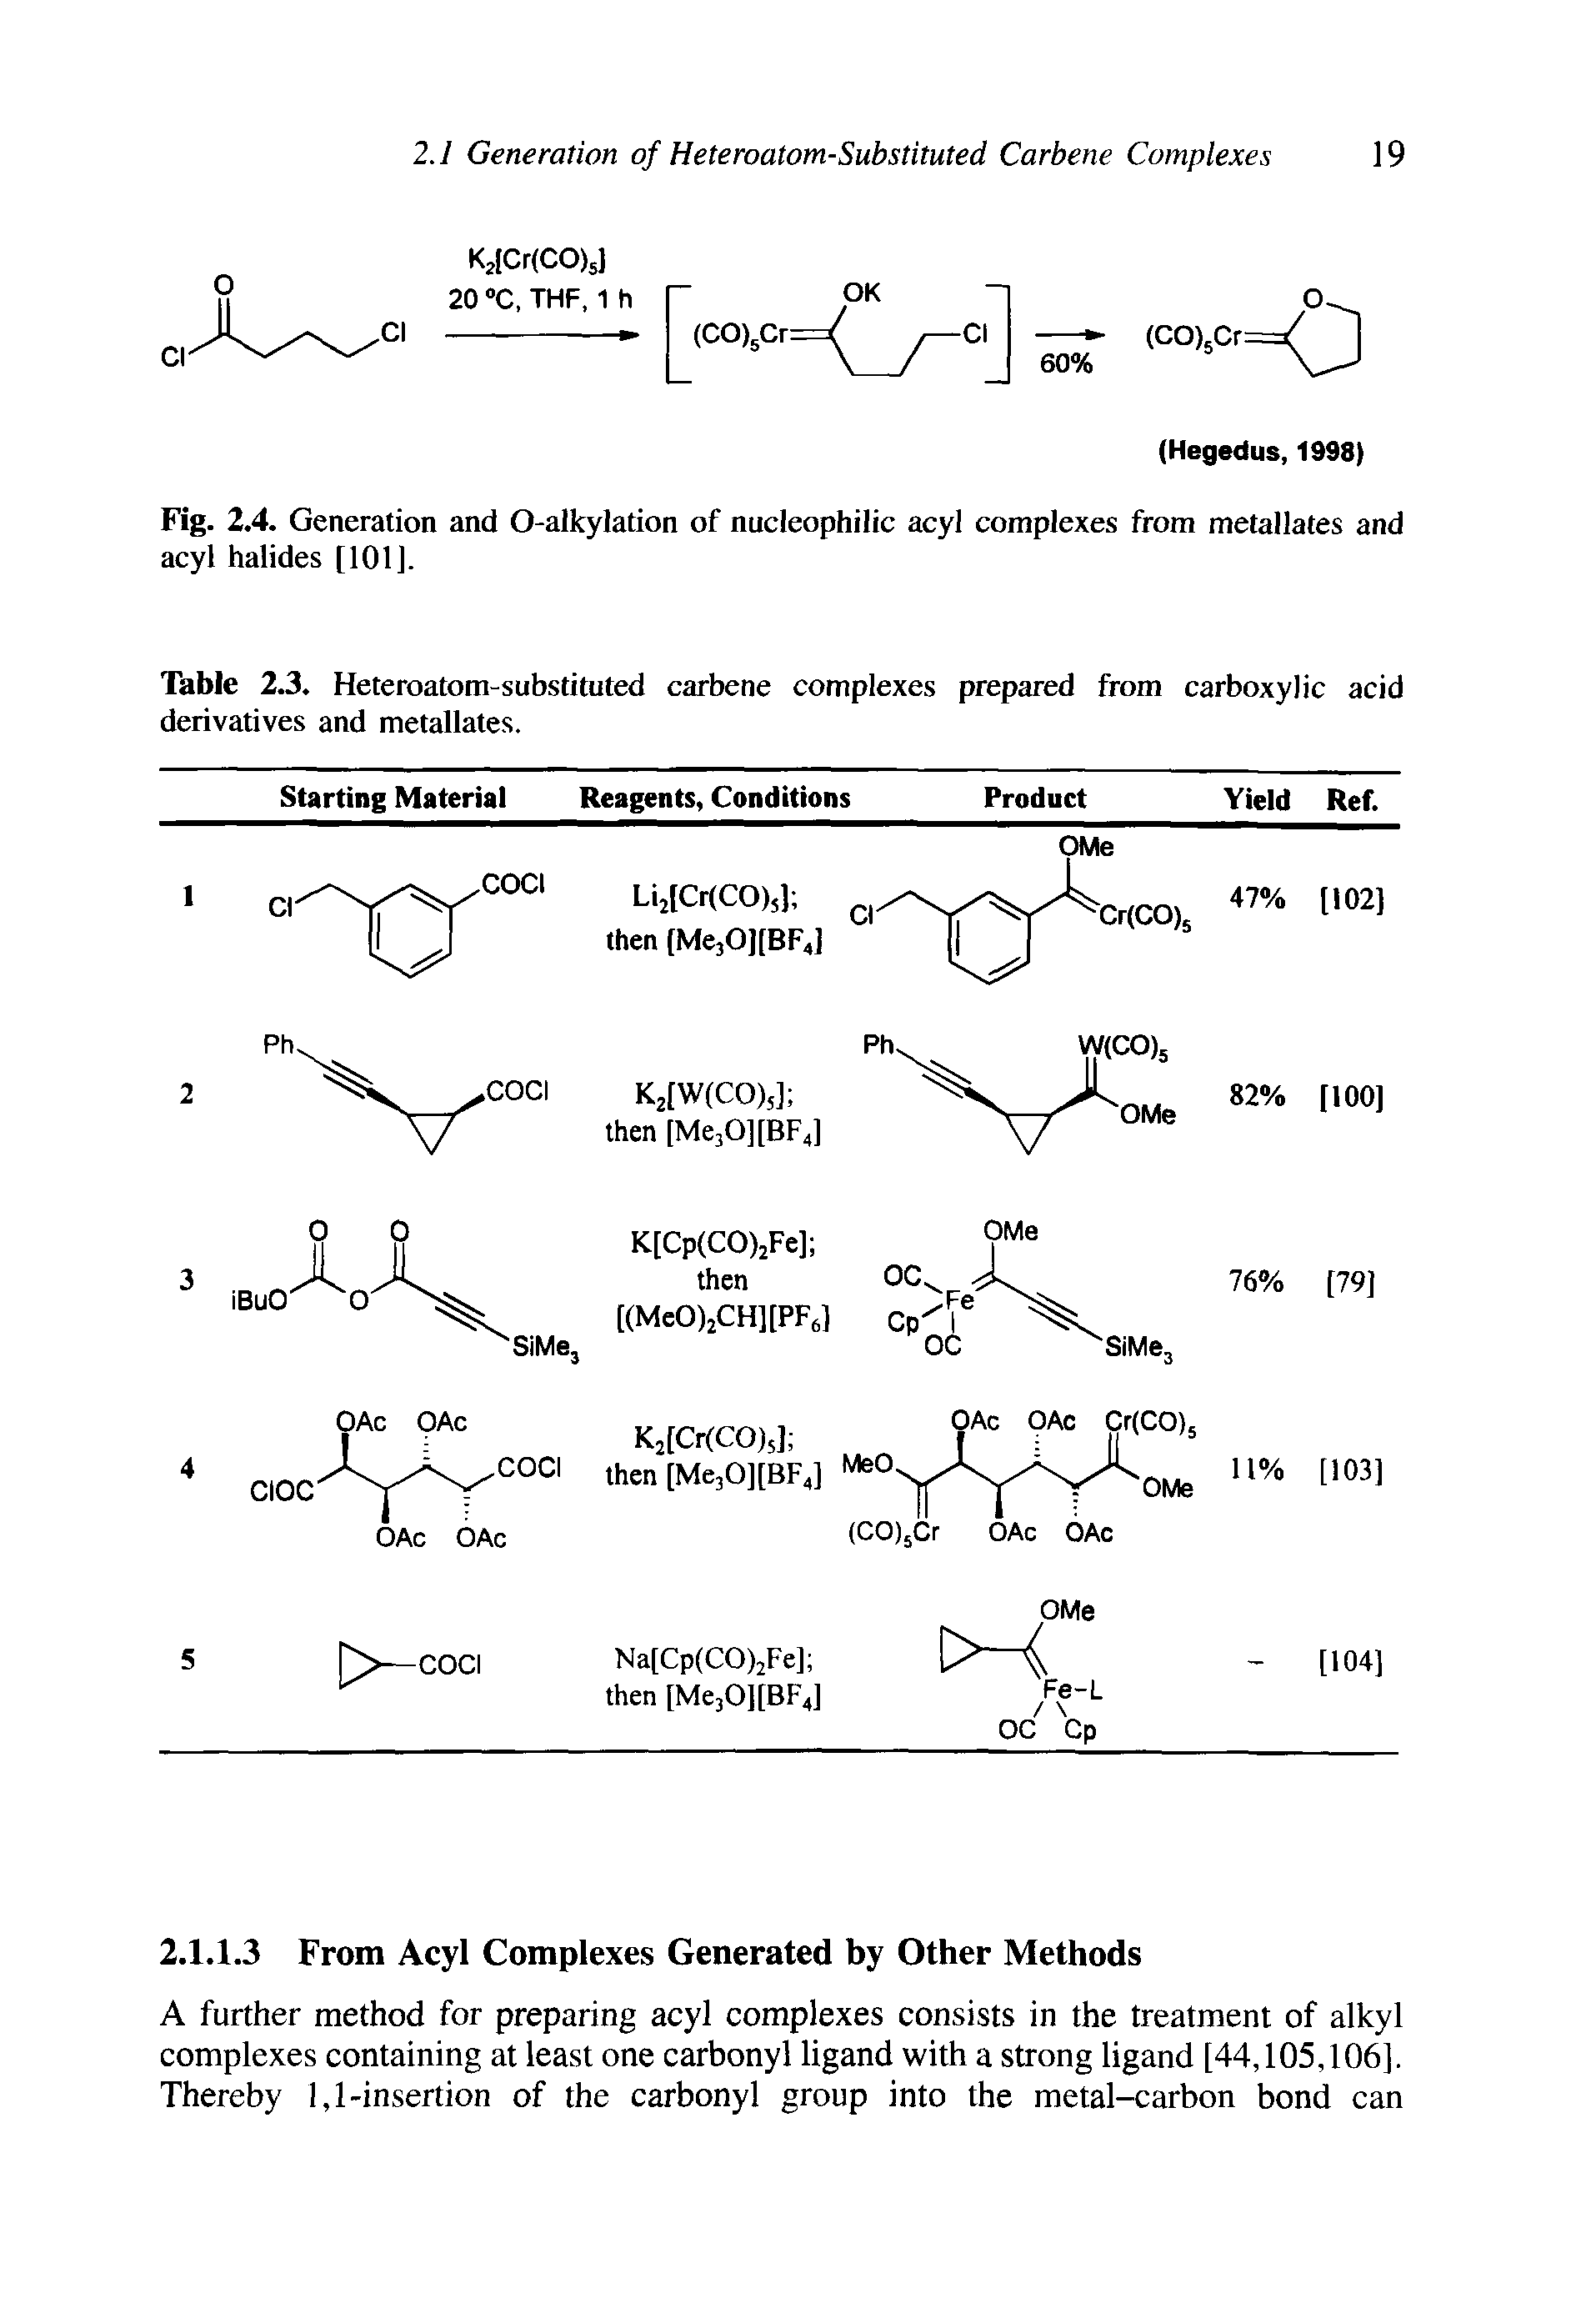 Table 2.3. Heteroatom-substituted carbene complexes prepared from carboxylic acid derivatives and metallates.